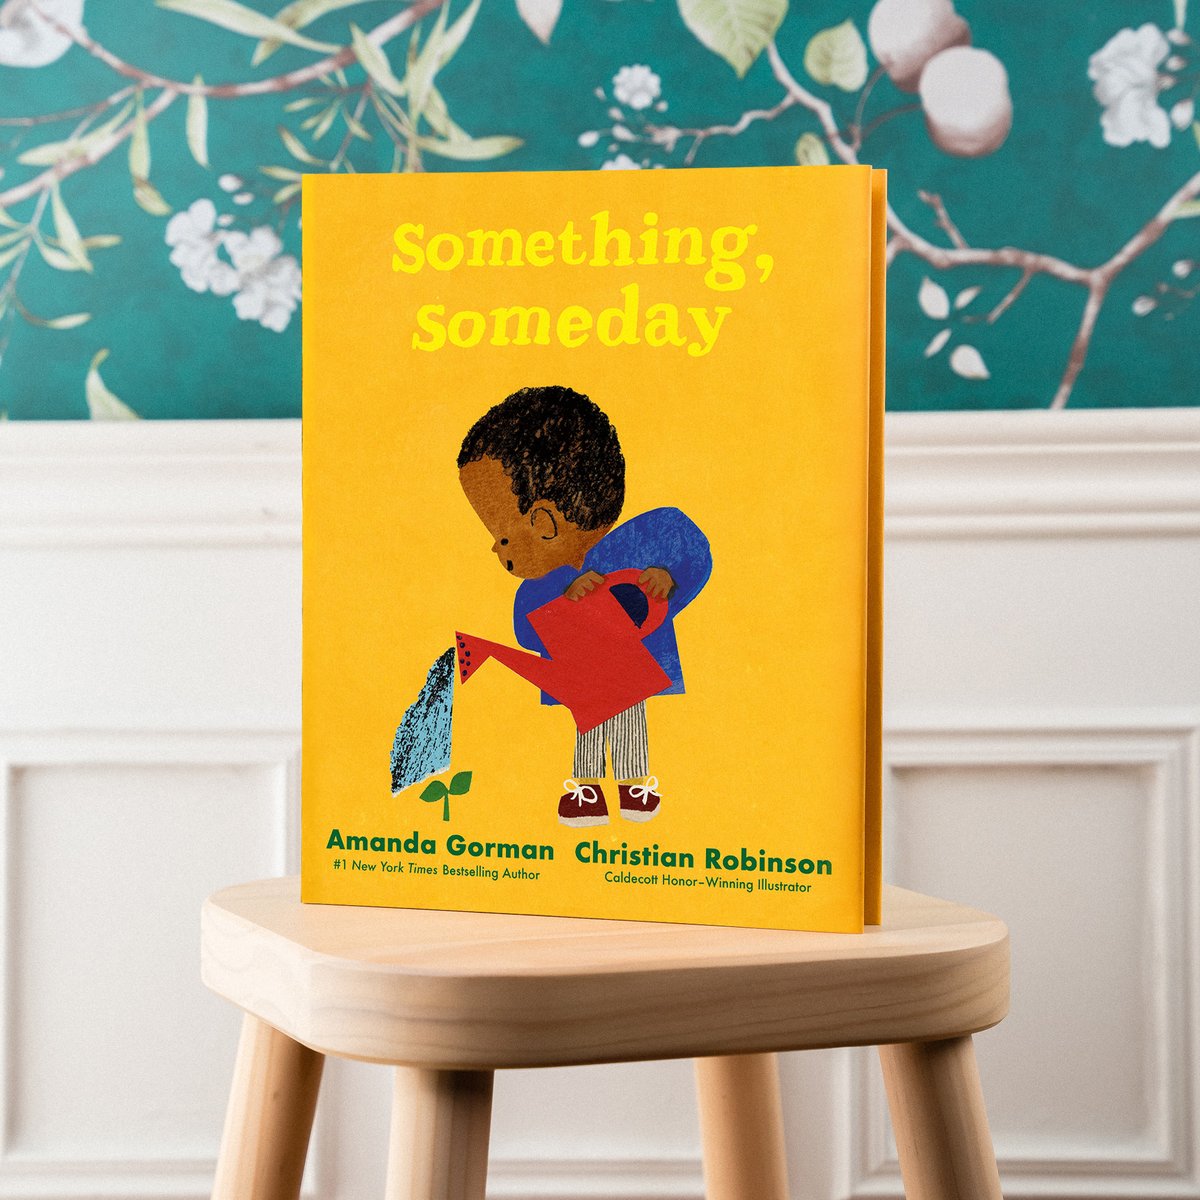 We just can't believe that SOMETHING, SOMEDAY by @TheAmandaGorman and illustrated by Christian Robinson hits shelves this week!! Coming soon to a bookstore near you on TUESDAY!!!